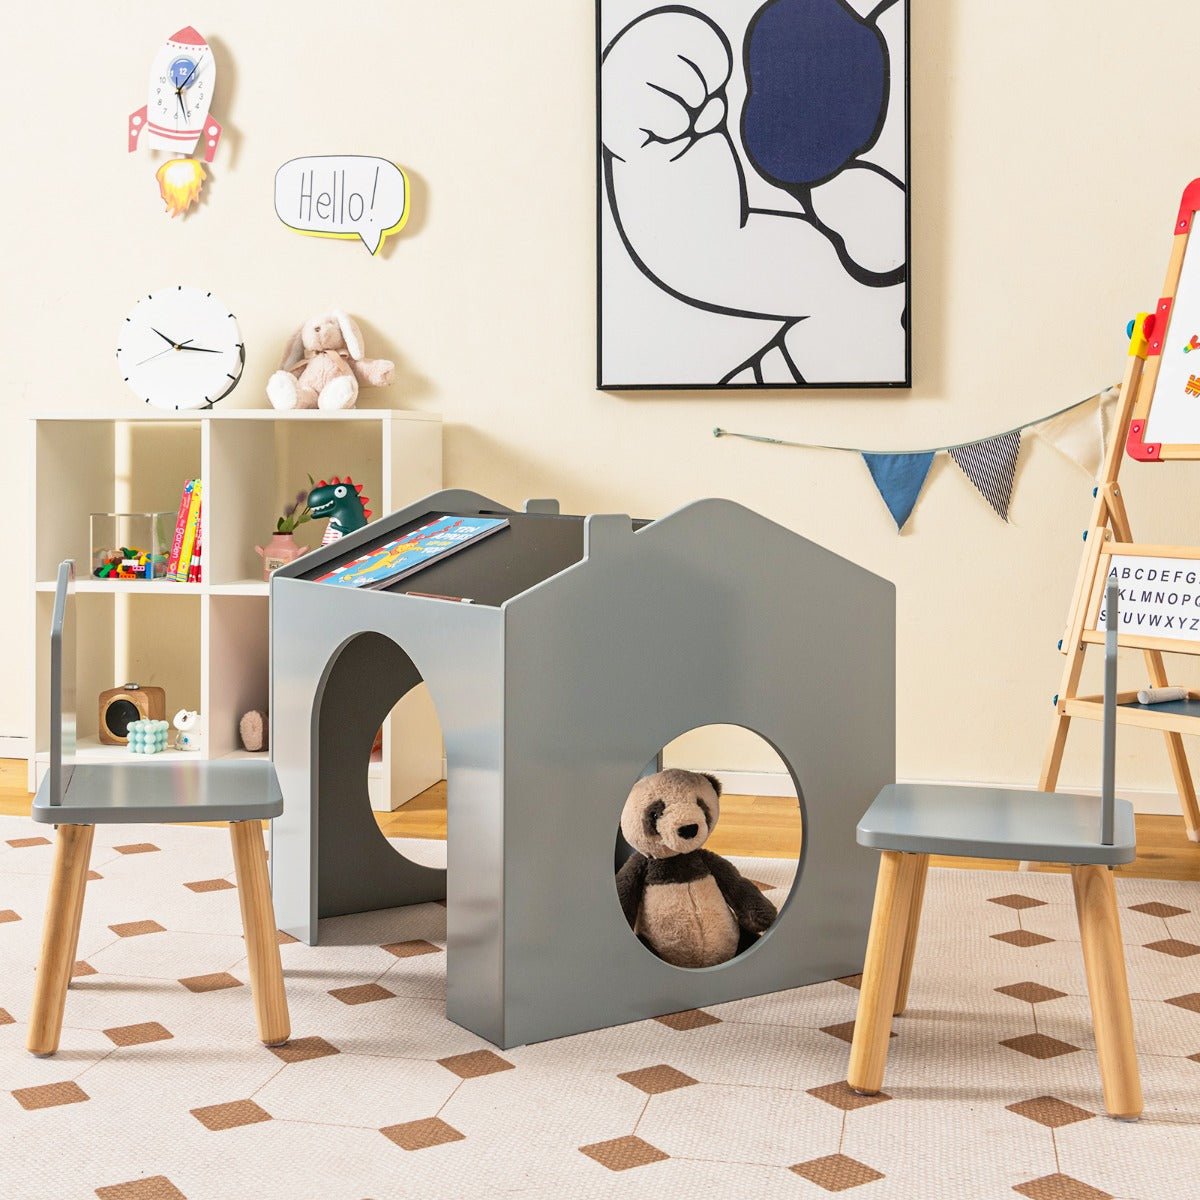 Engaging Grey Chalkboard Set: Wooden Table and Chairs for Playful Learning